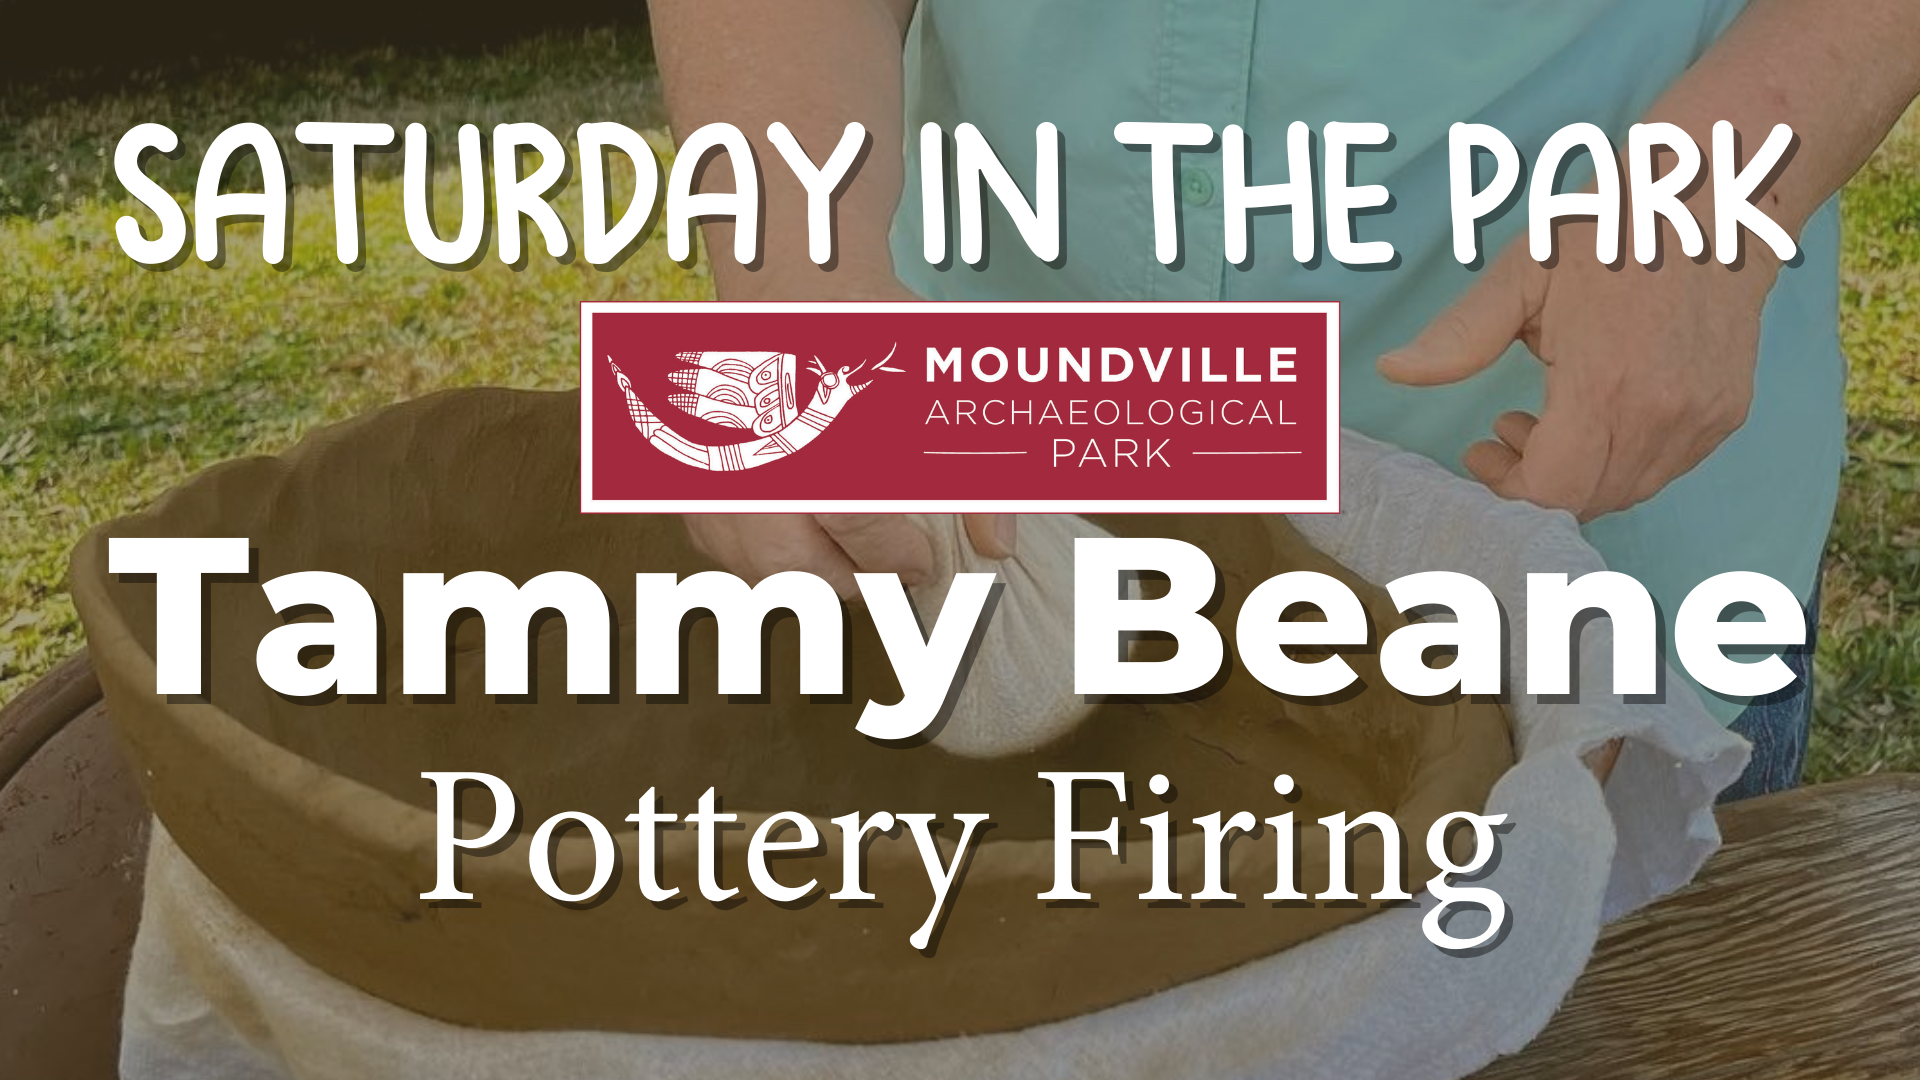 Saturday in the Park: Pottery Firing